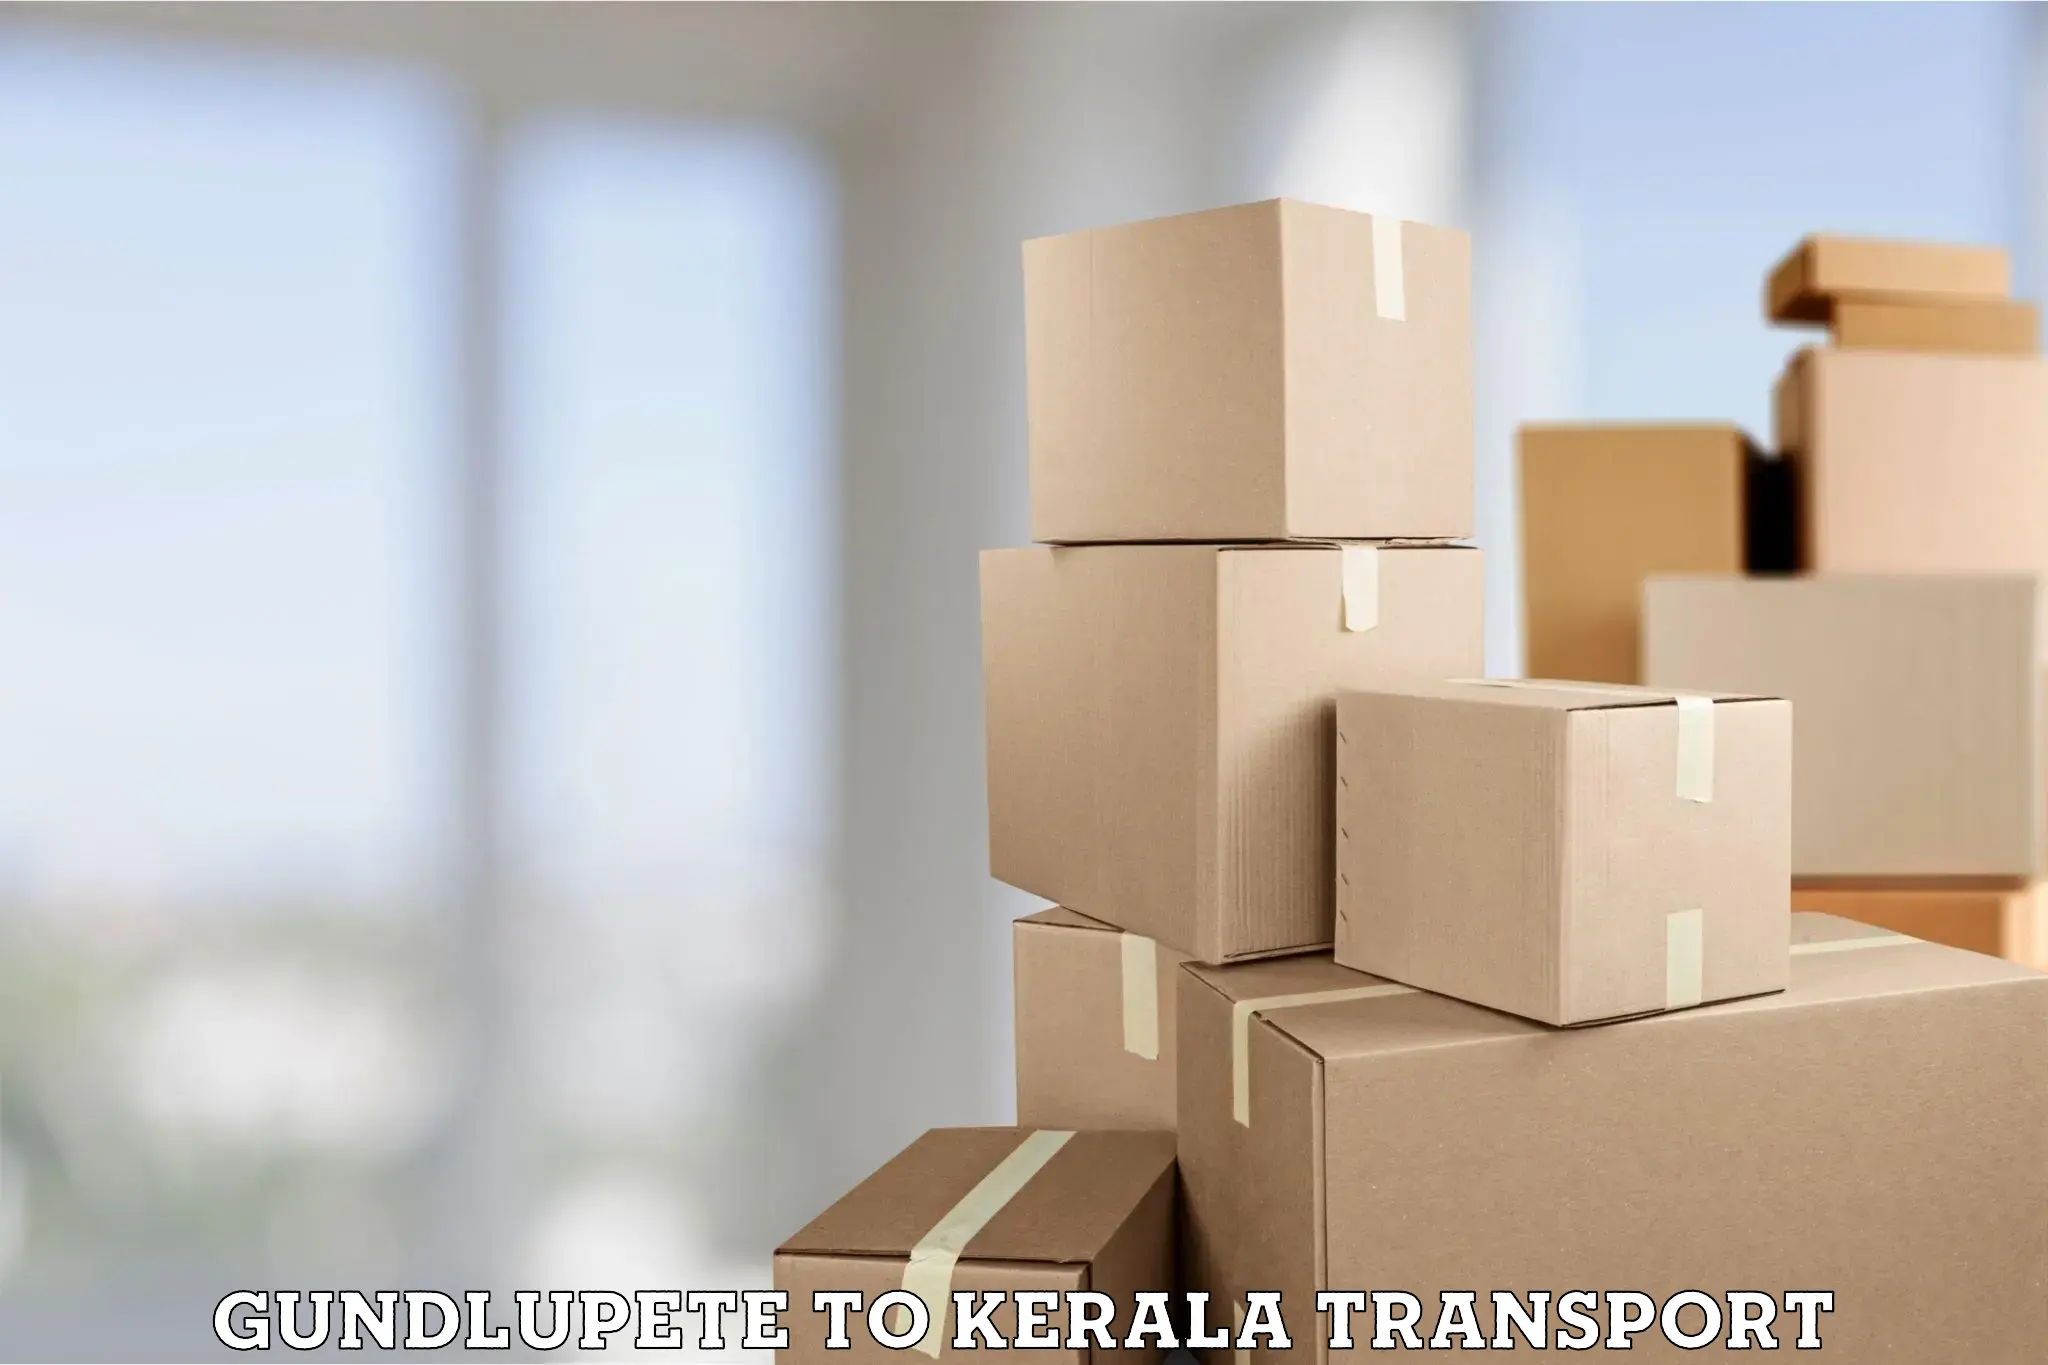 Two wheeler parcel service Gundlupete to Kumily